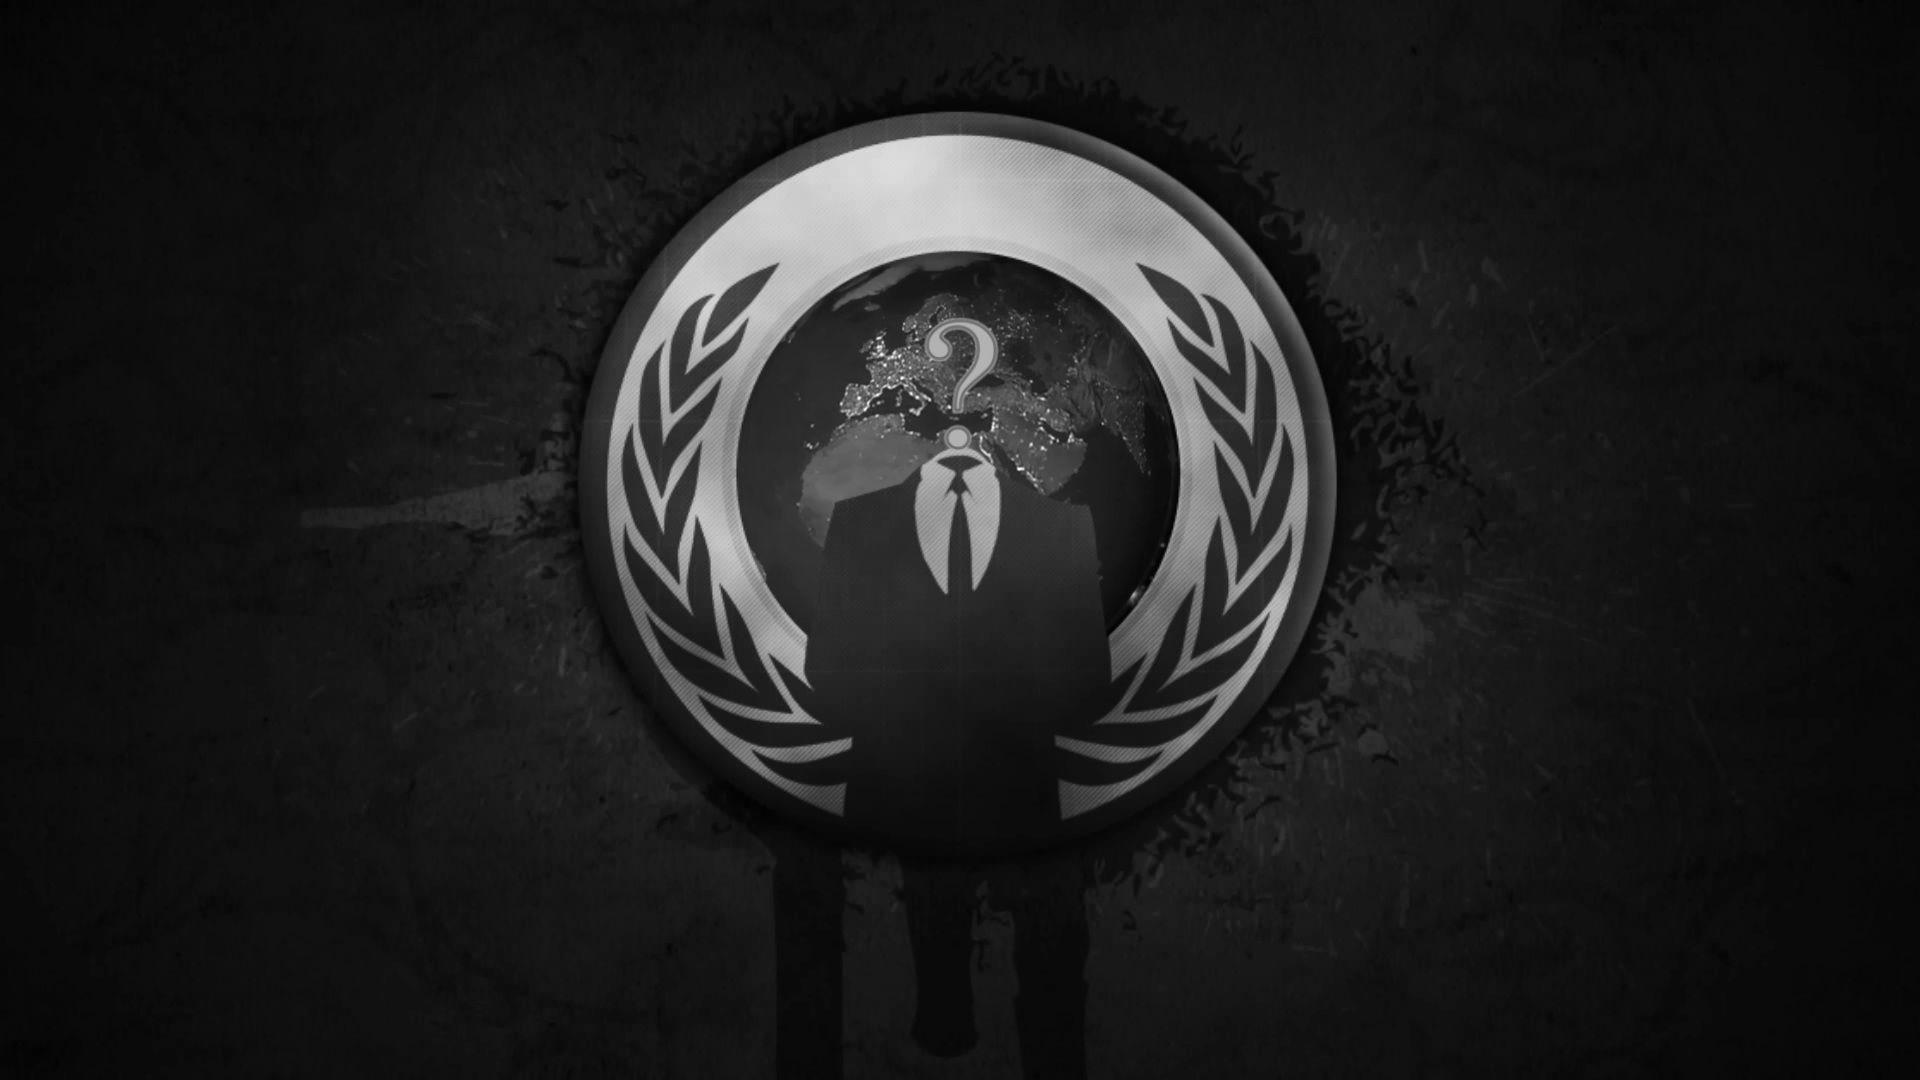 Anonymous Logo - anonymous-logo-wallpaper-4 : Free Download, Borrow, and Streaming ...